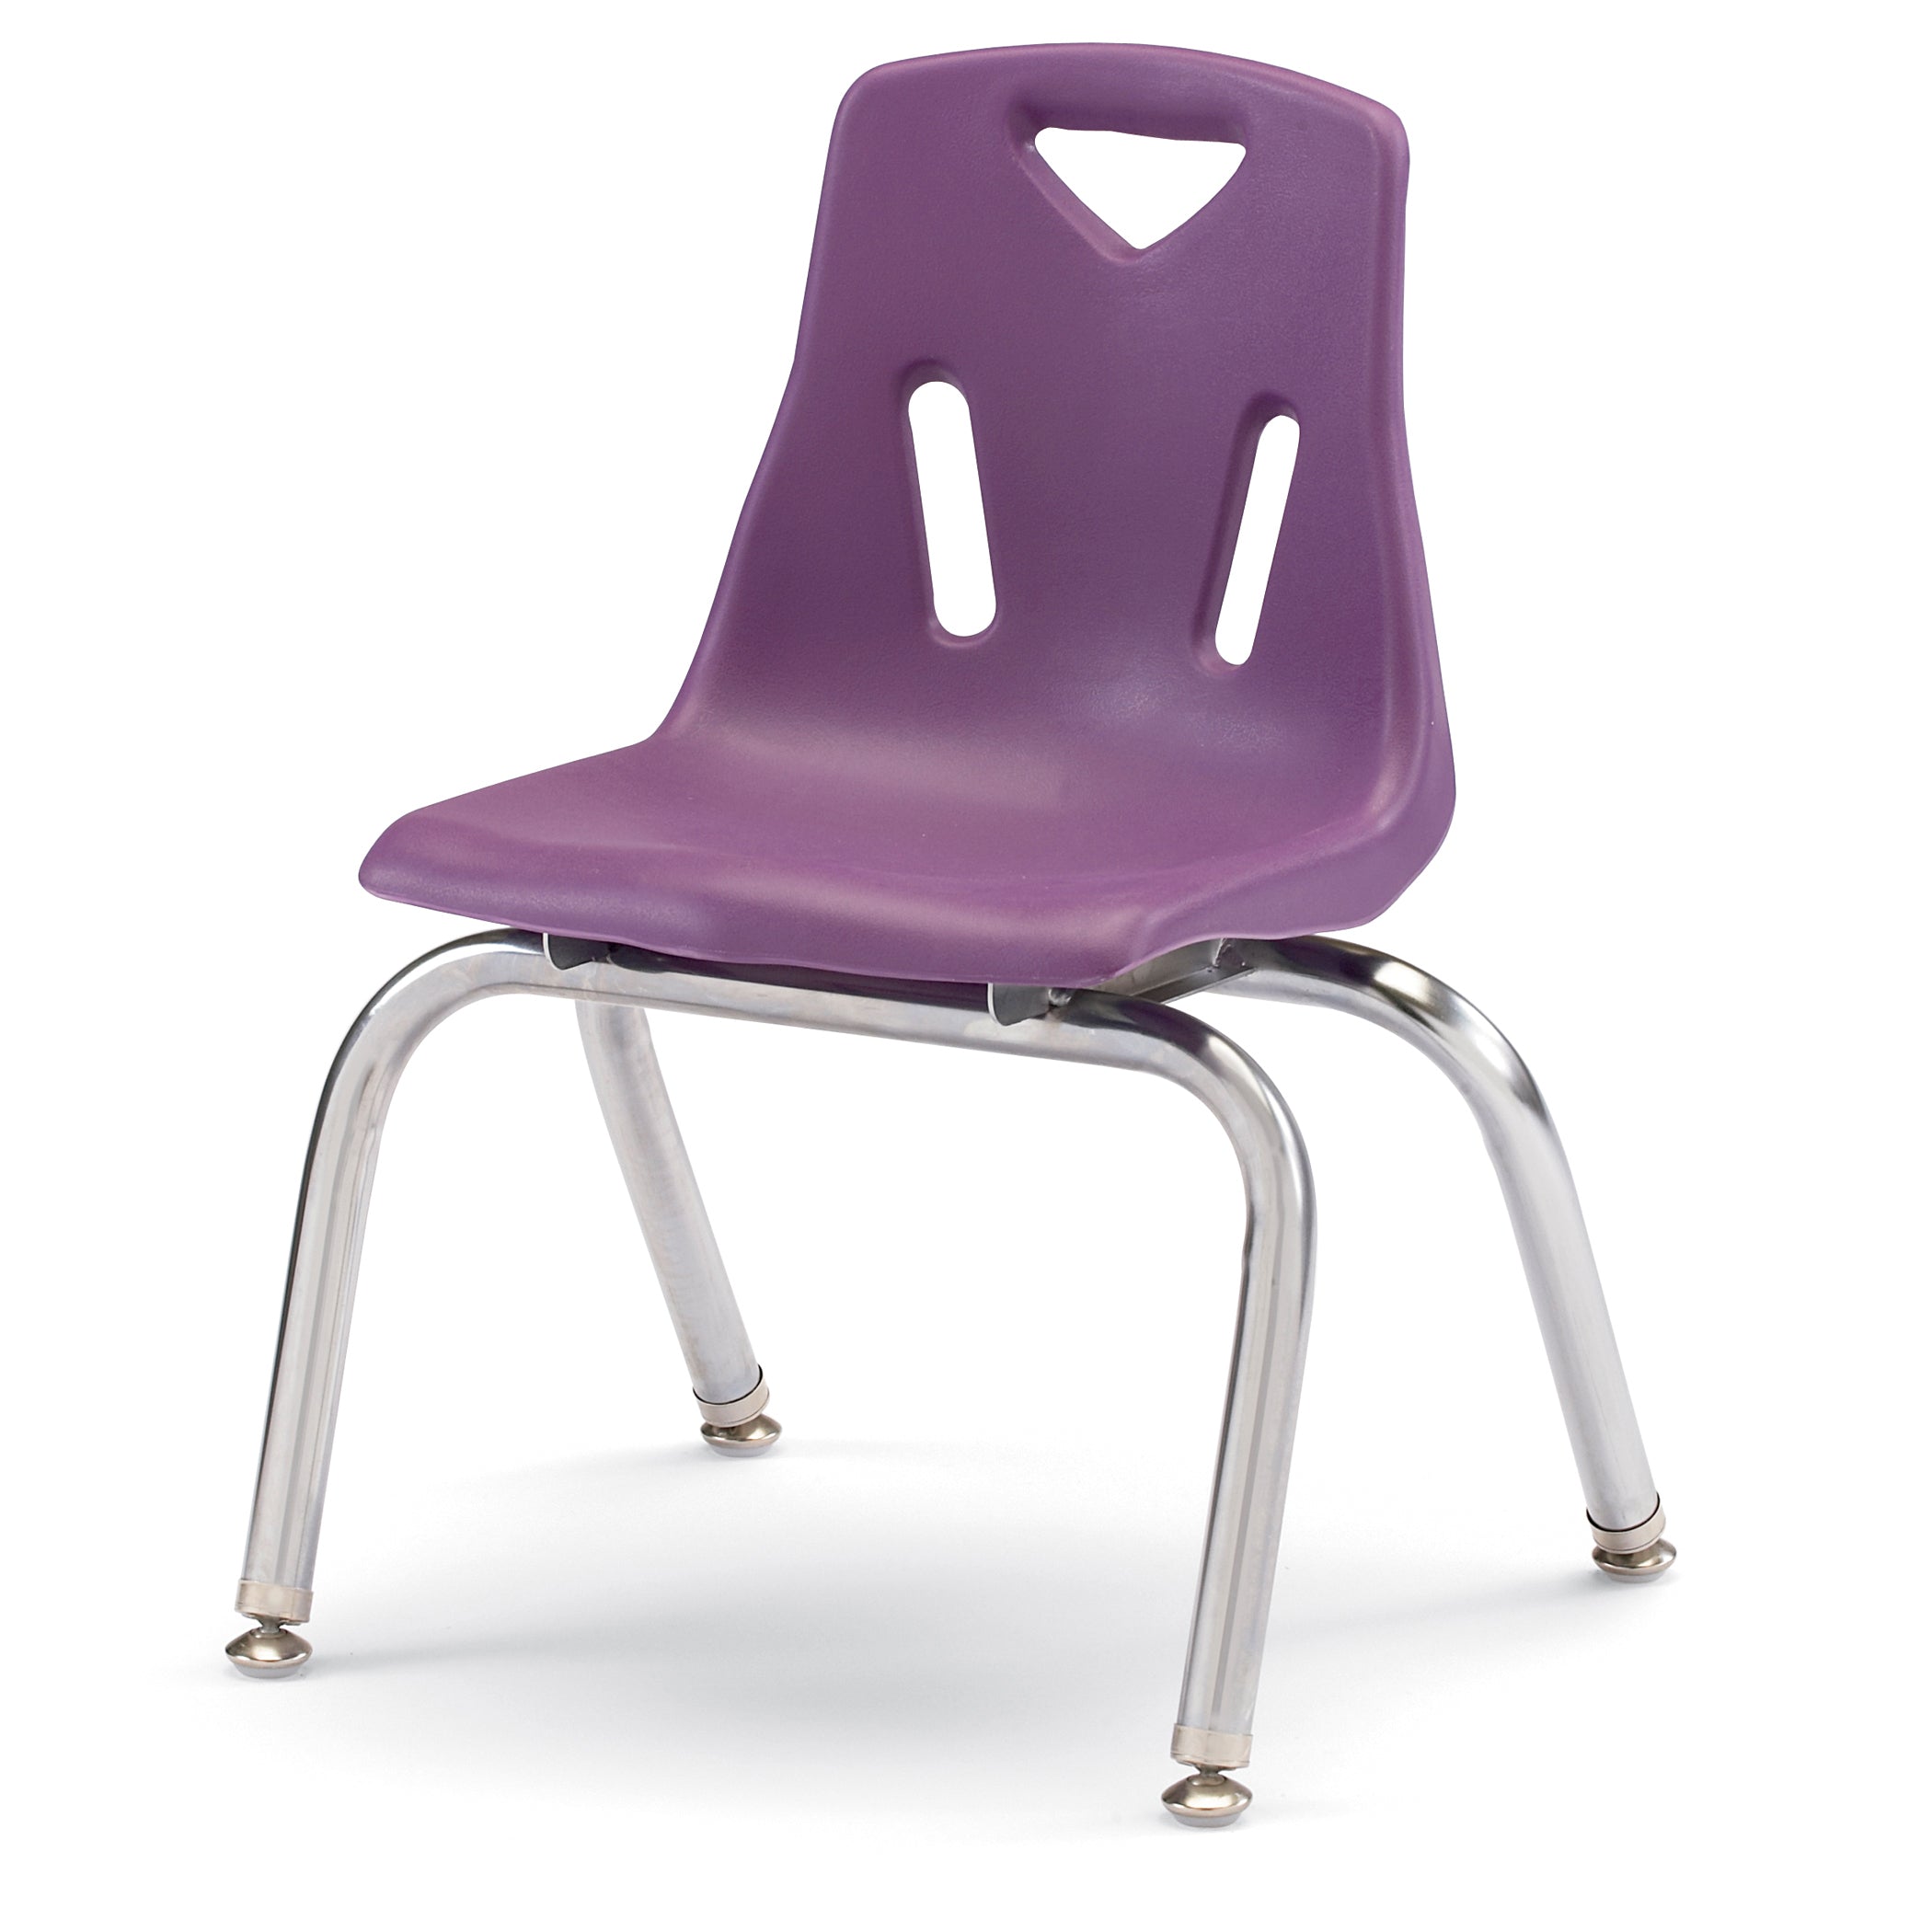 8142JC1004, Berries Stacking Chair with Chrome-Plated Legs - 12" Ht - Purple